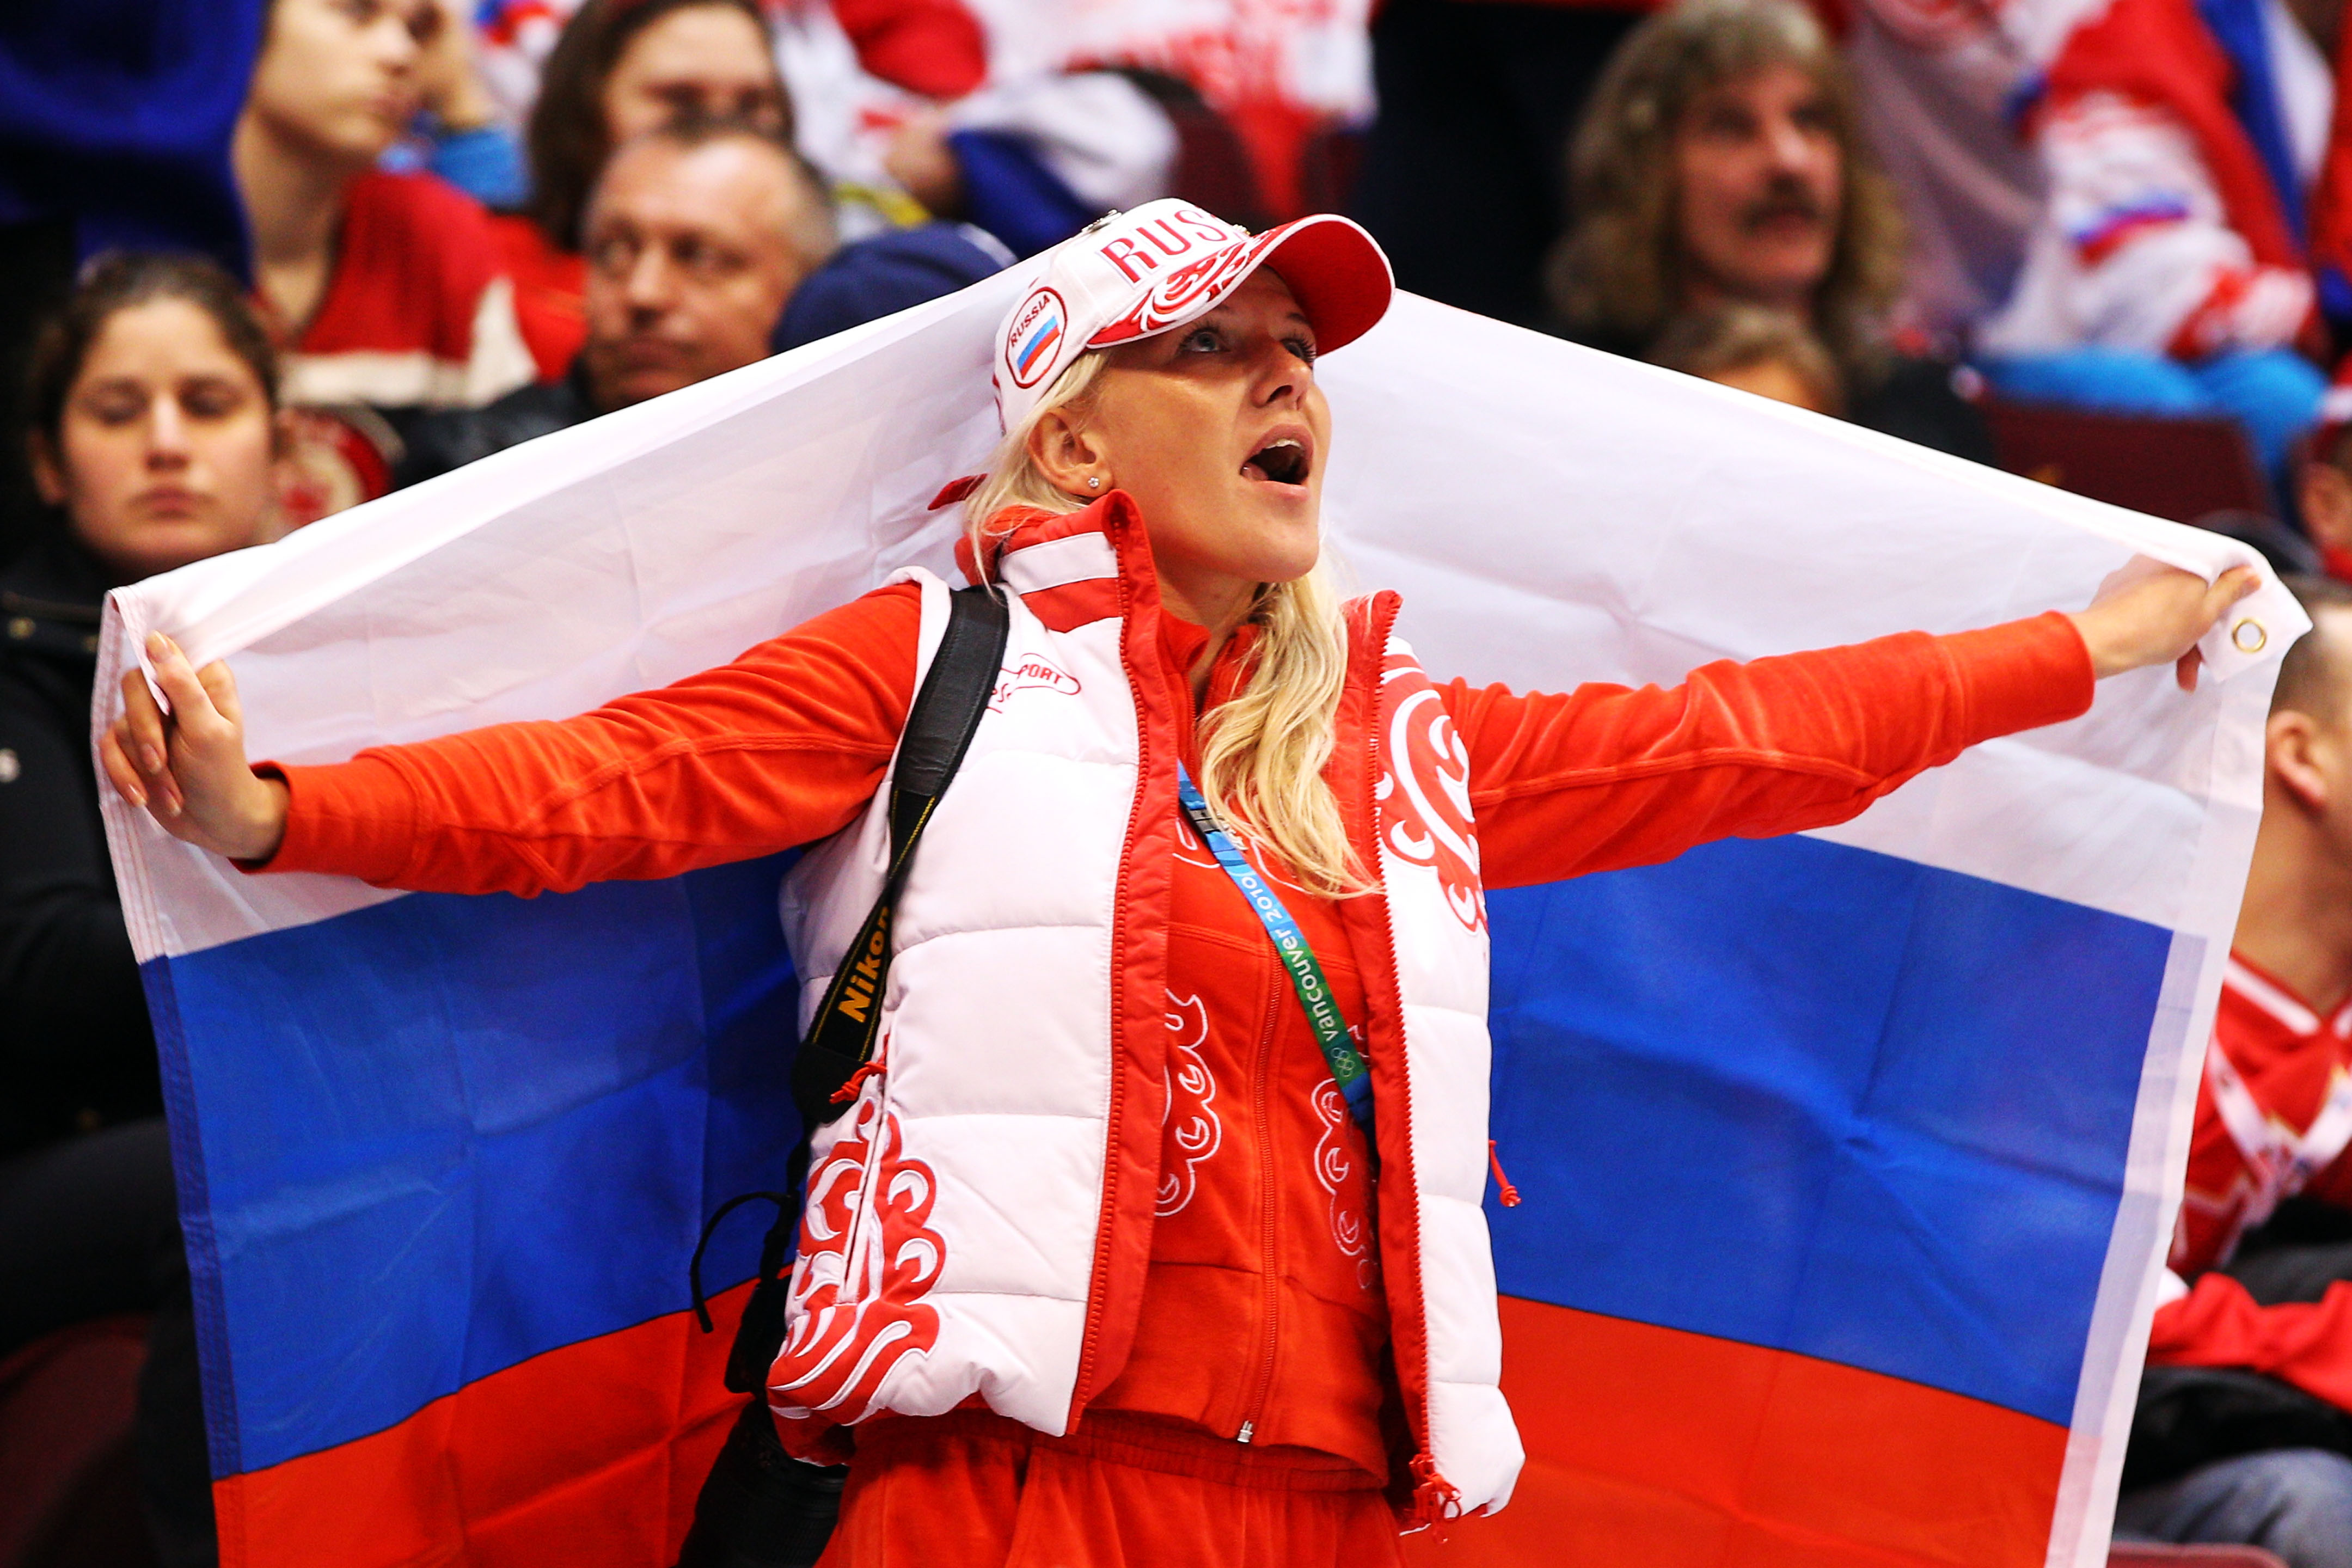 VANCOUVER, BC - FEBRUARY 24:  A fan of Russia holds a flag in the stands during the ice hockey men's quarter final game between Russia and Canada on day 13 of the Vancouver 2010 Winter Olympics at Canada Hockey Place on February 24, 2010 in Vancouver, Can